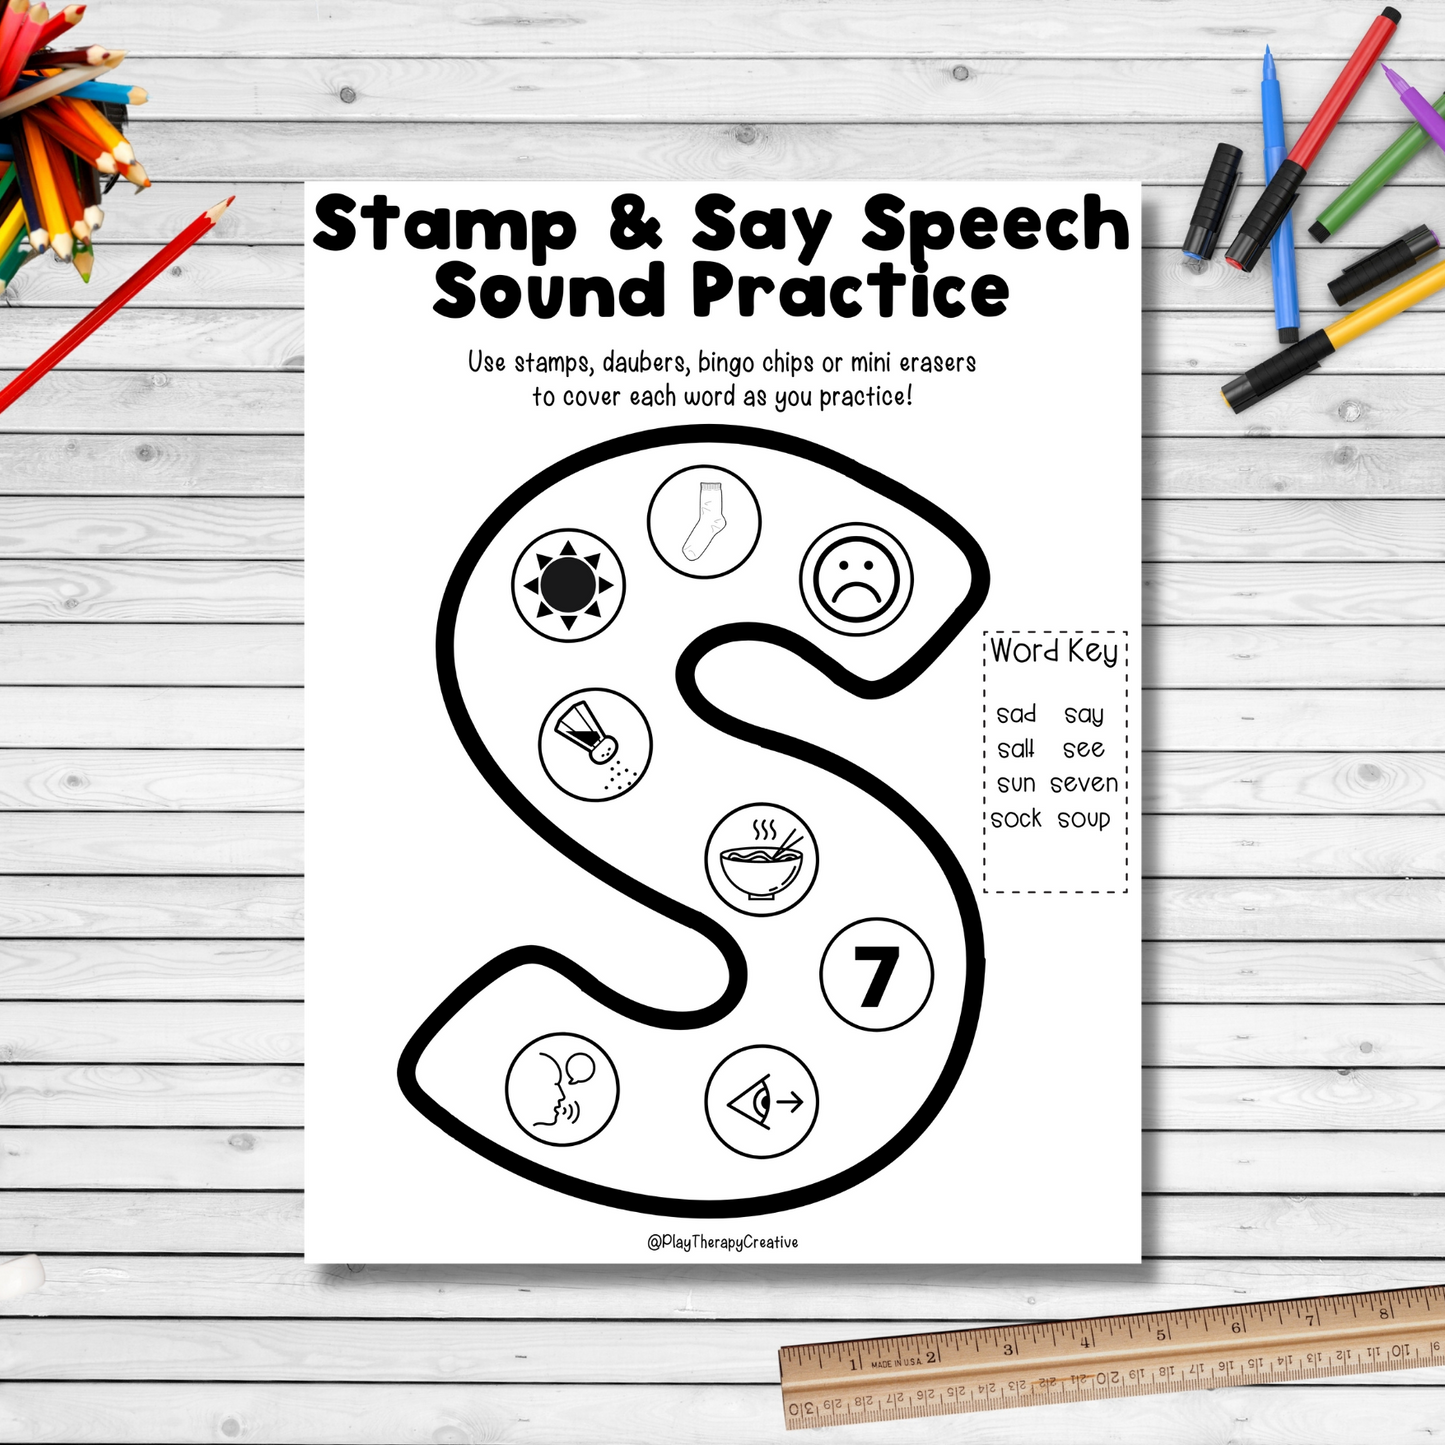 Stamp & Say Speech Sound Practice for Articulation Speech Therapy